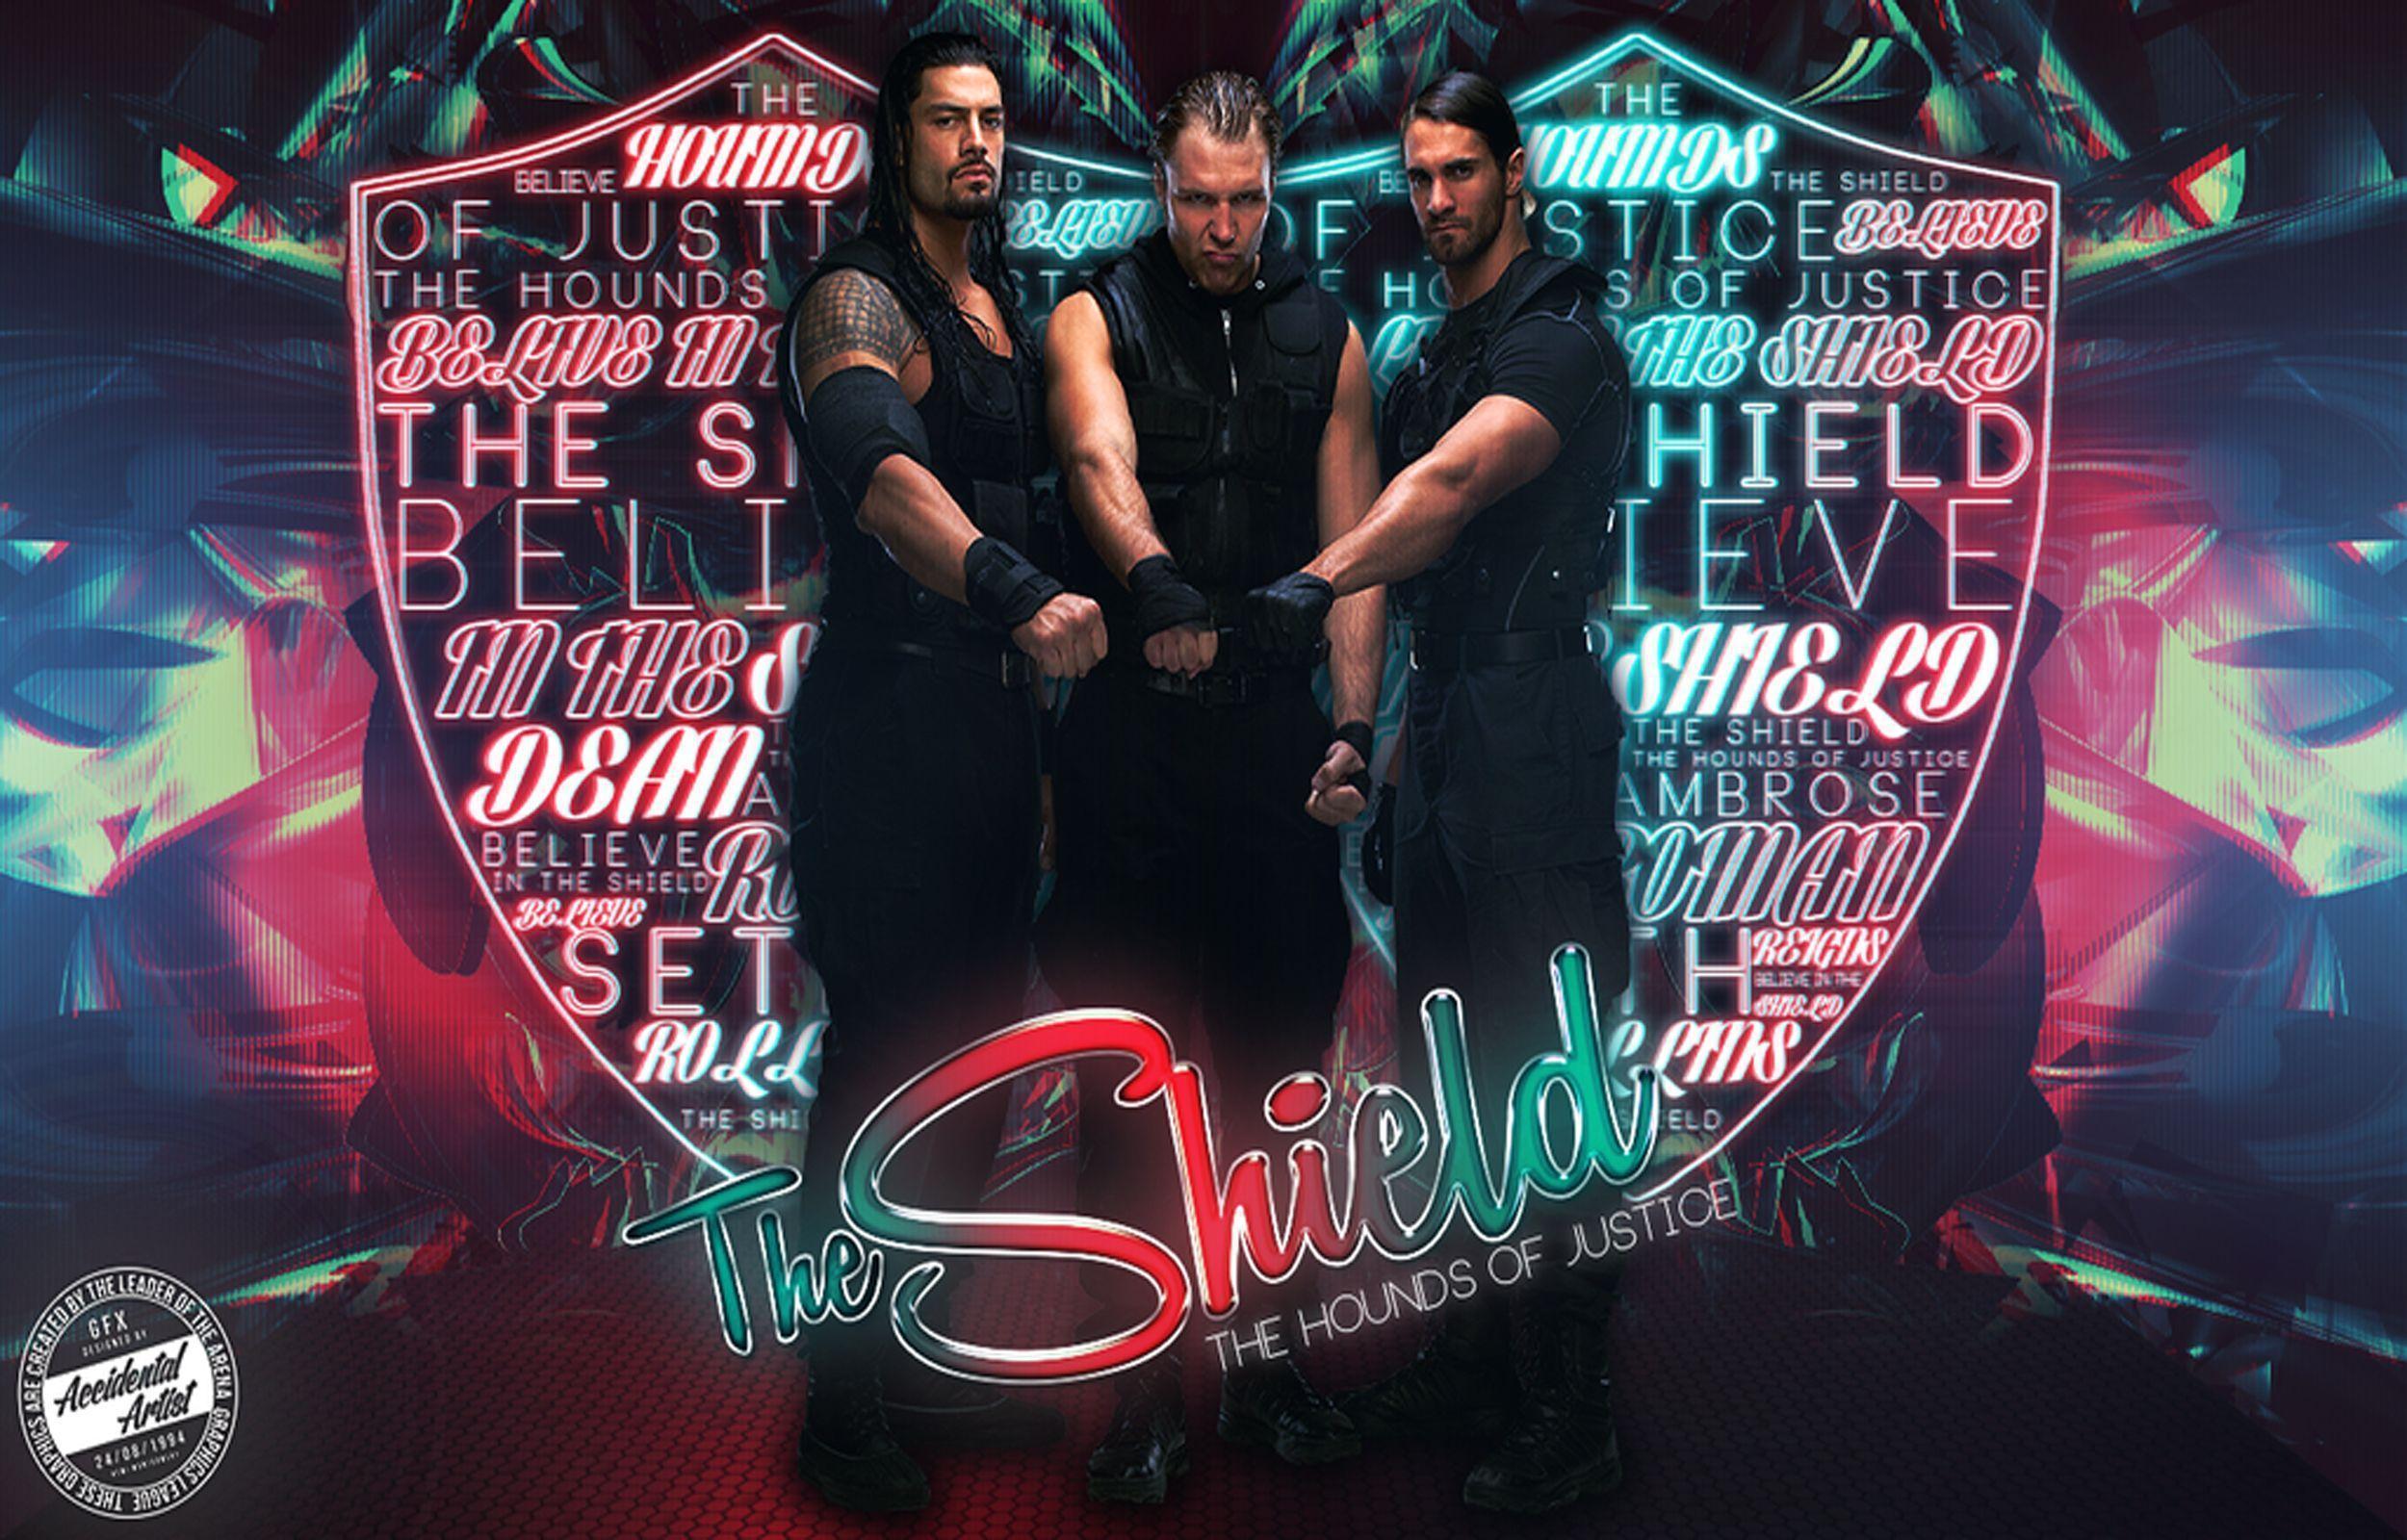 The Shield Wwe HD With Resolutions Pixel 2500x1600 #the